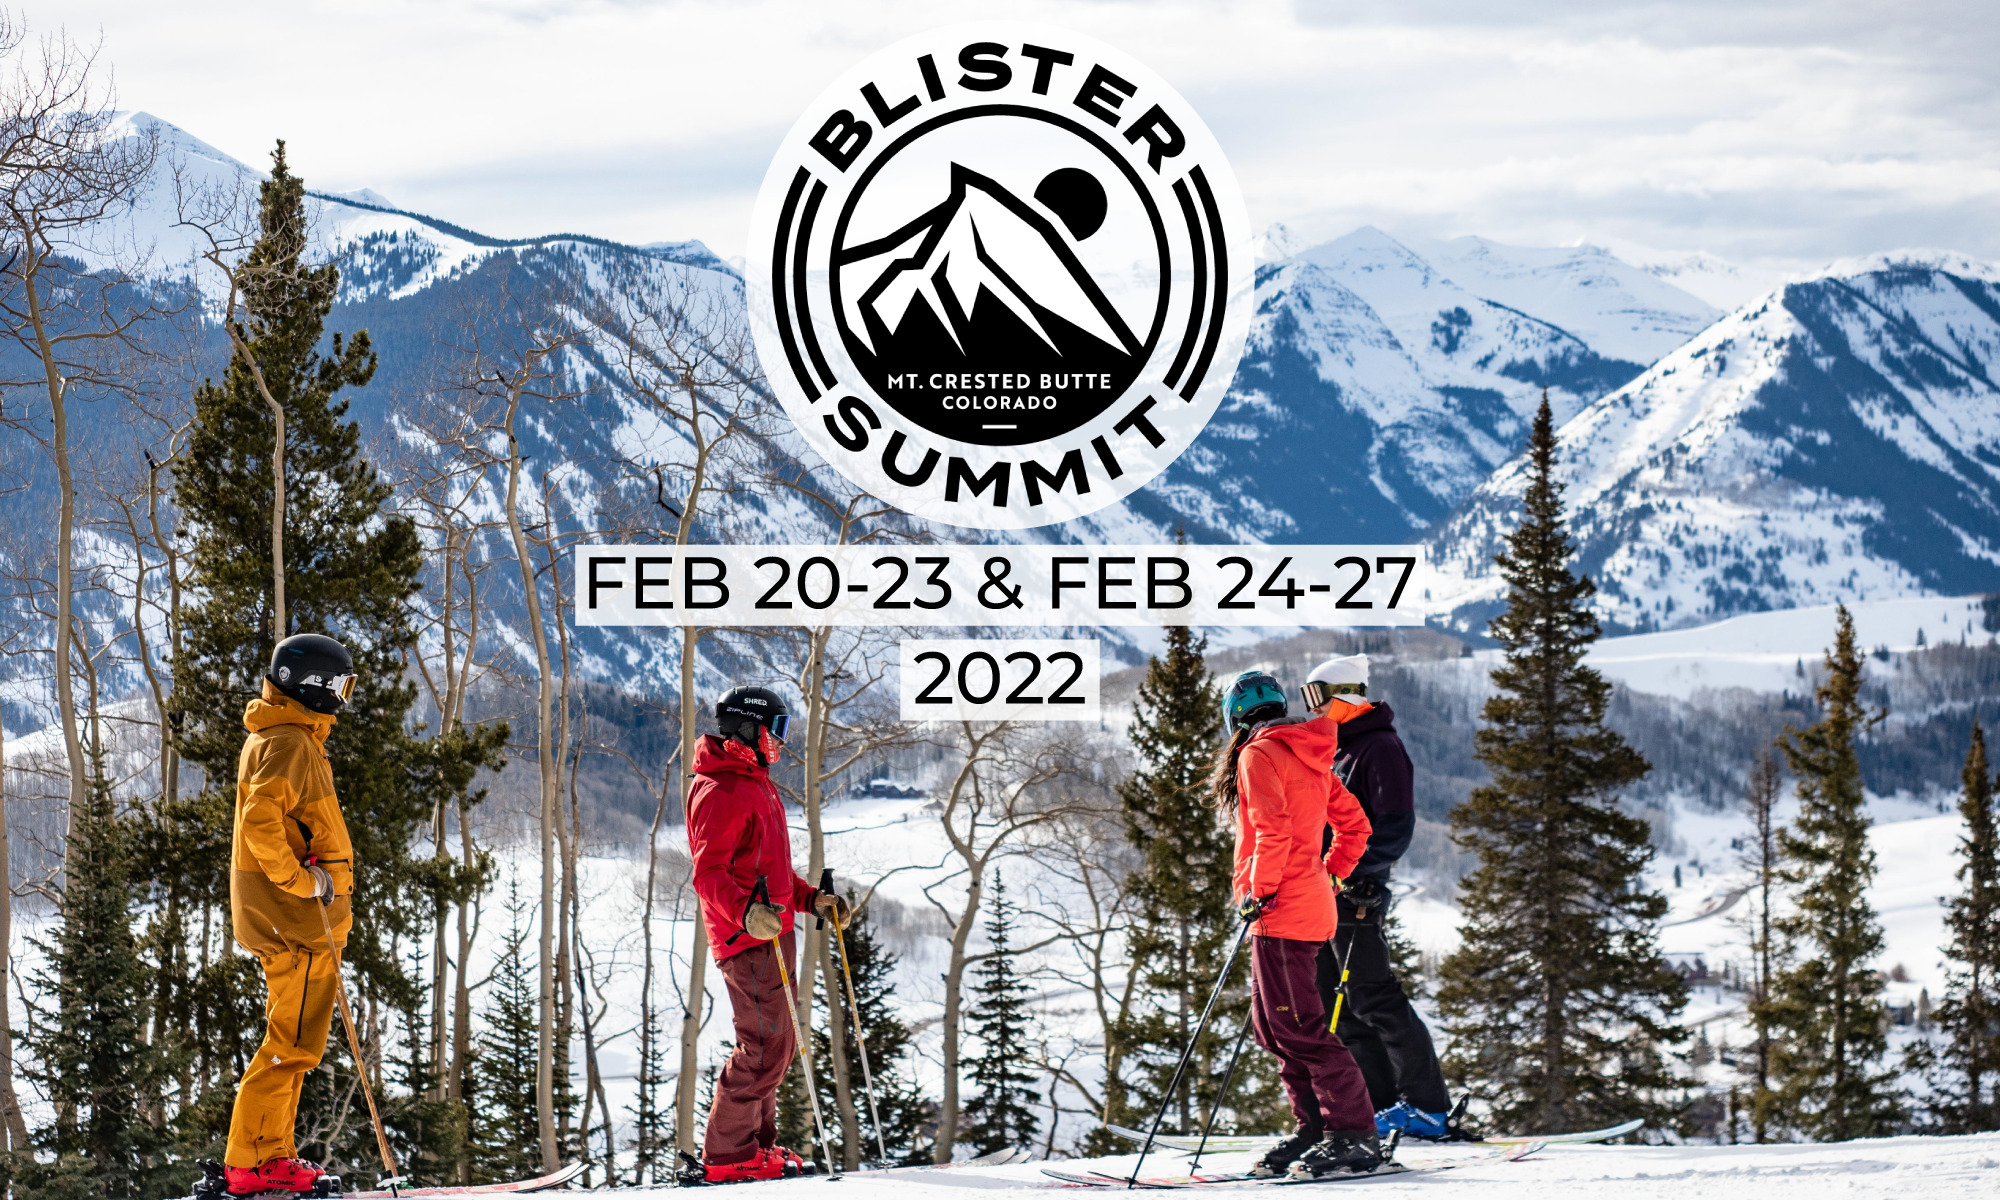 The Blister Summit was created for YOU, BLISTER